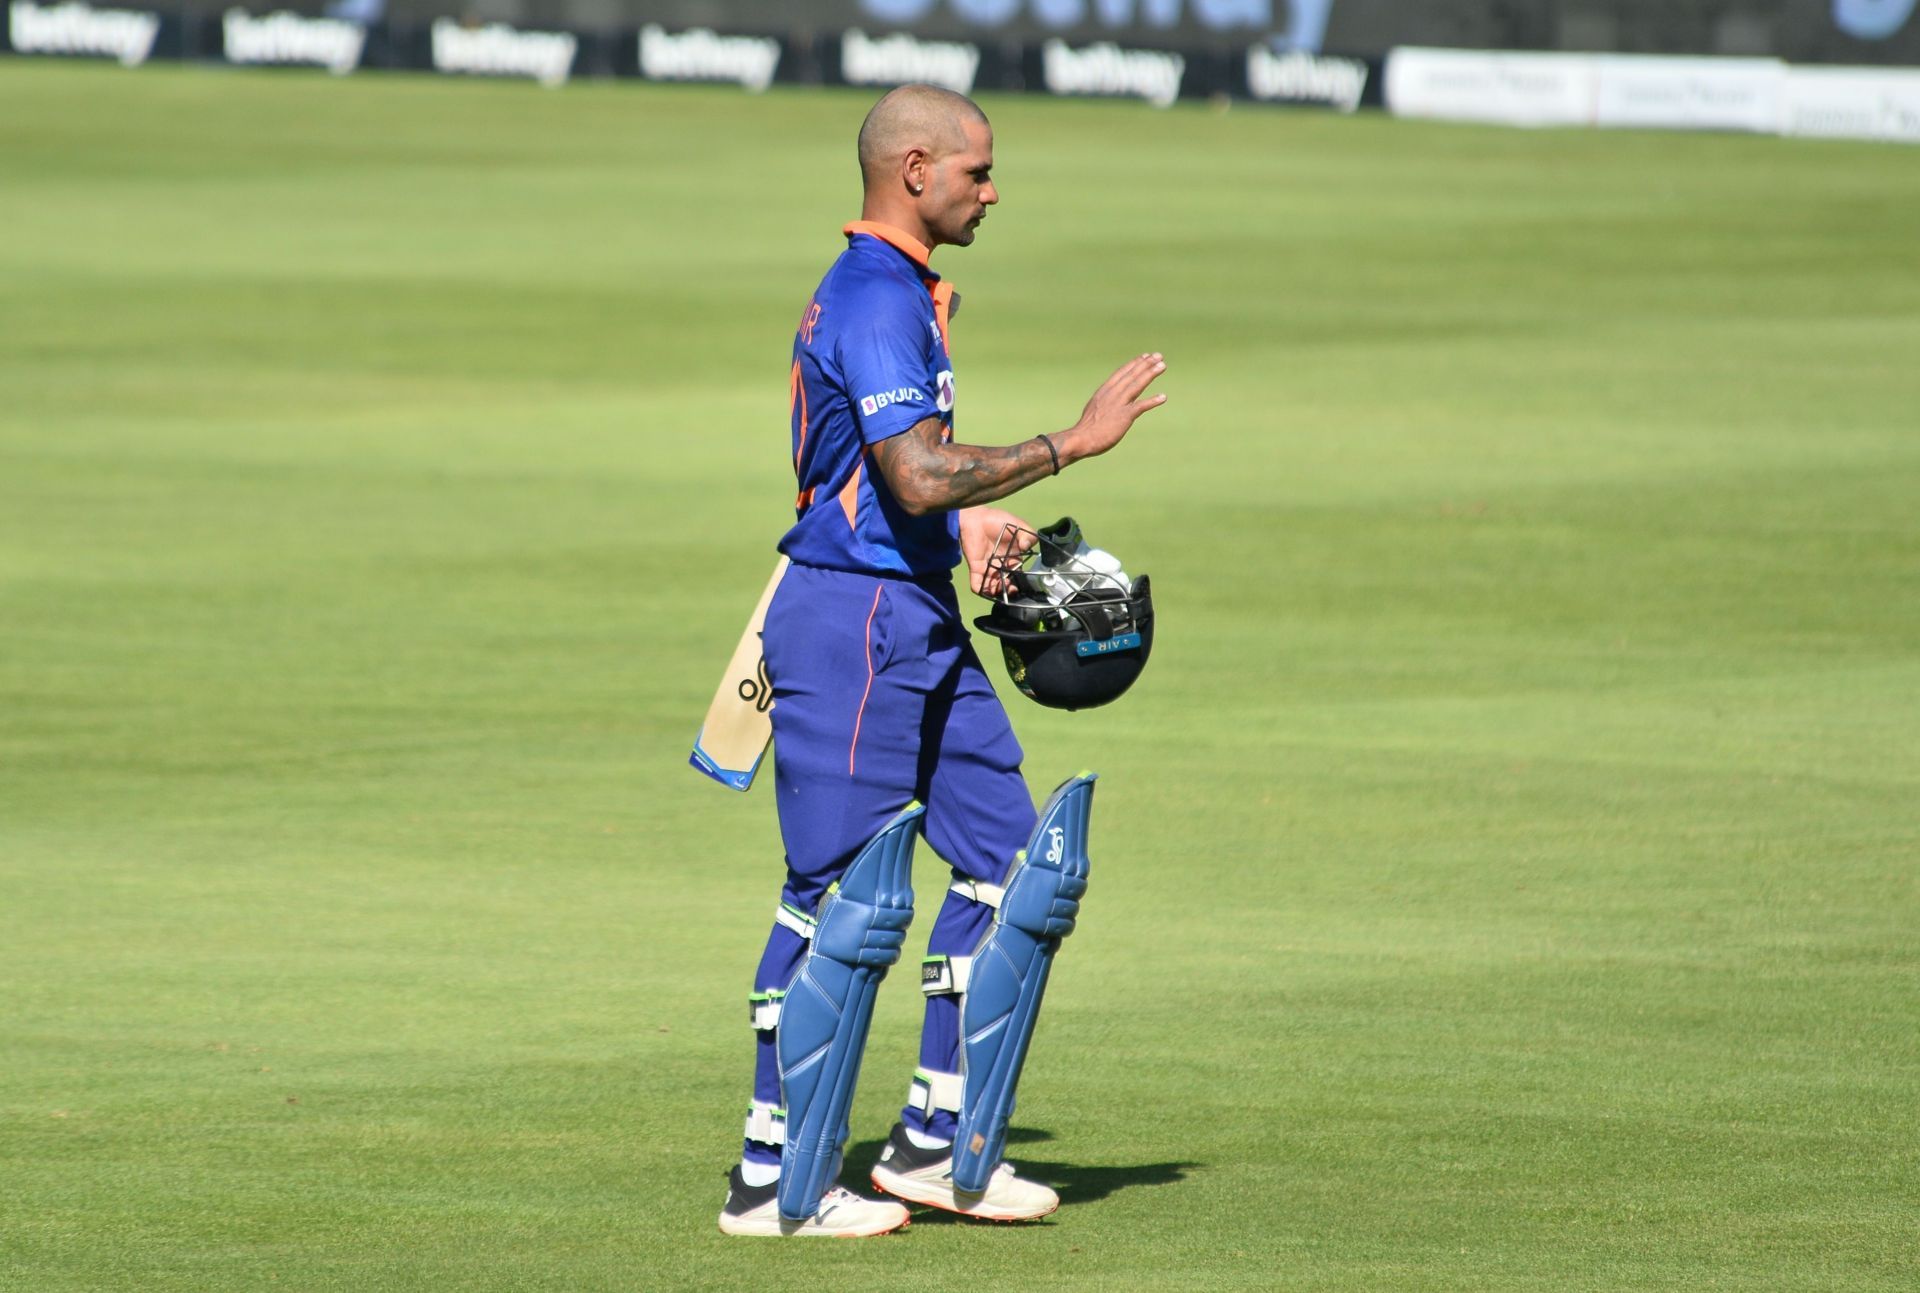 Shikhar Dhawan did not have a great time in the ODI series against England.